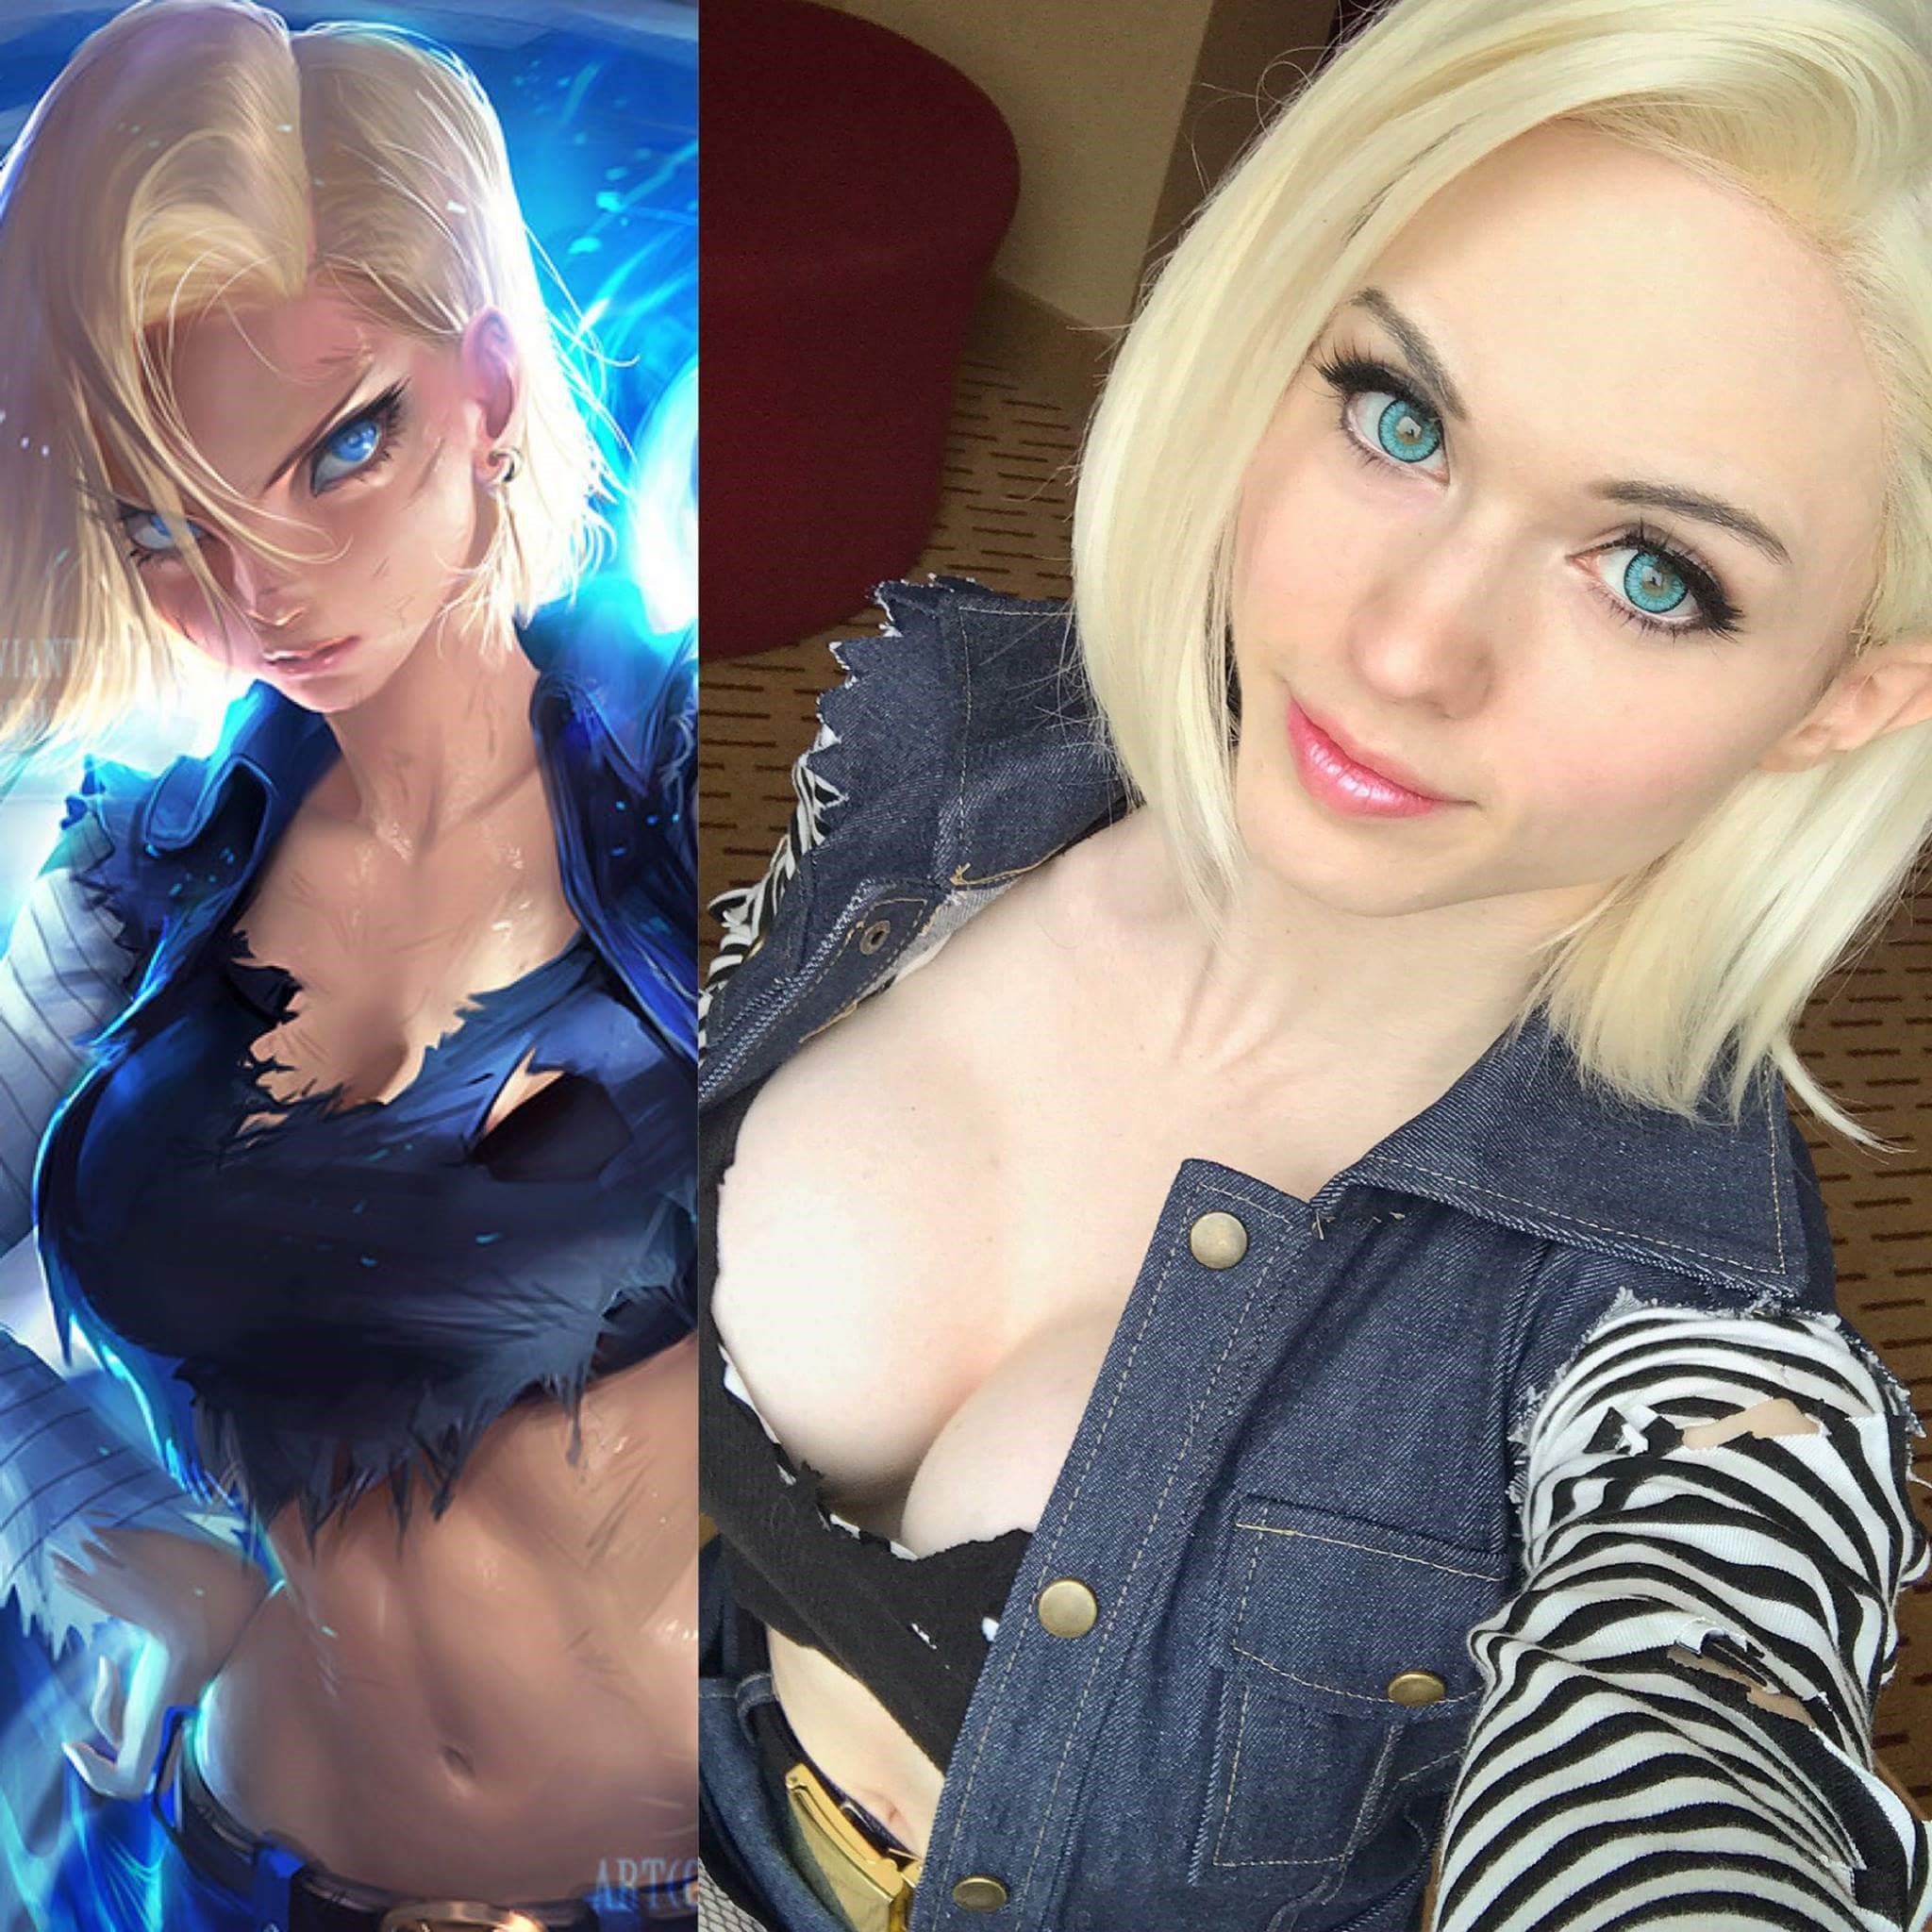 android 18 cosplay porn - Me